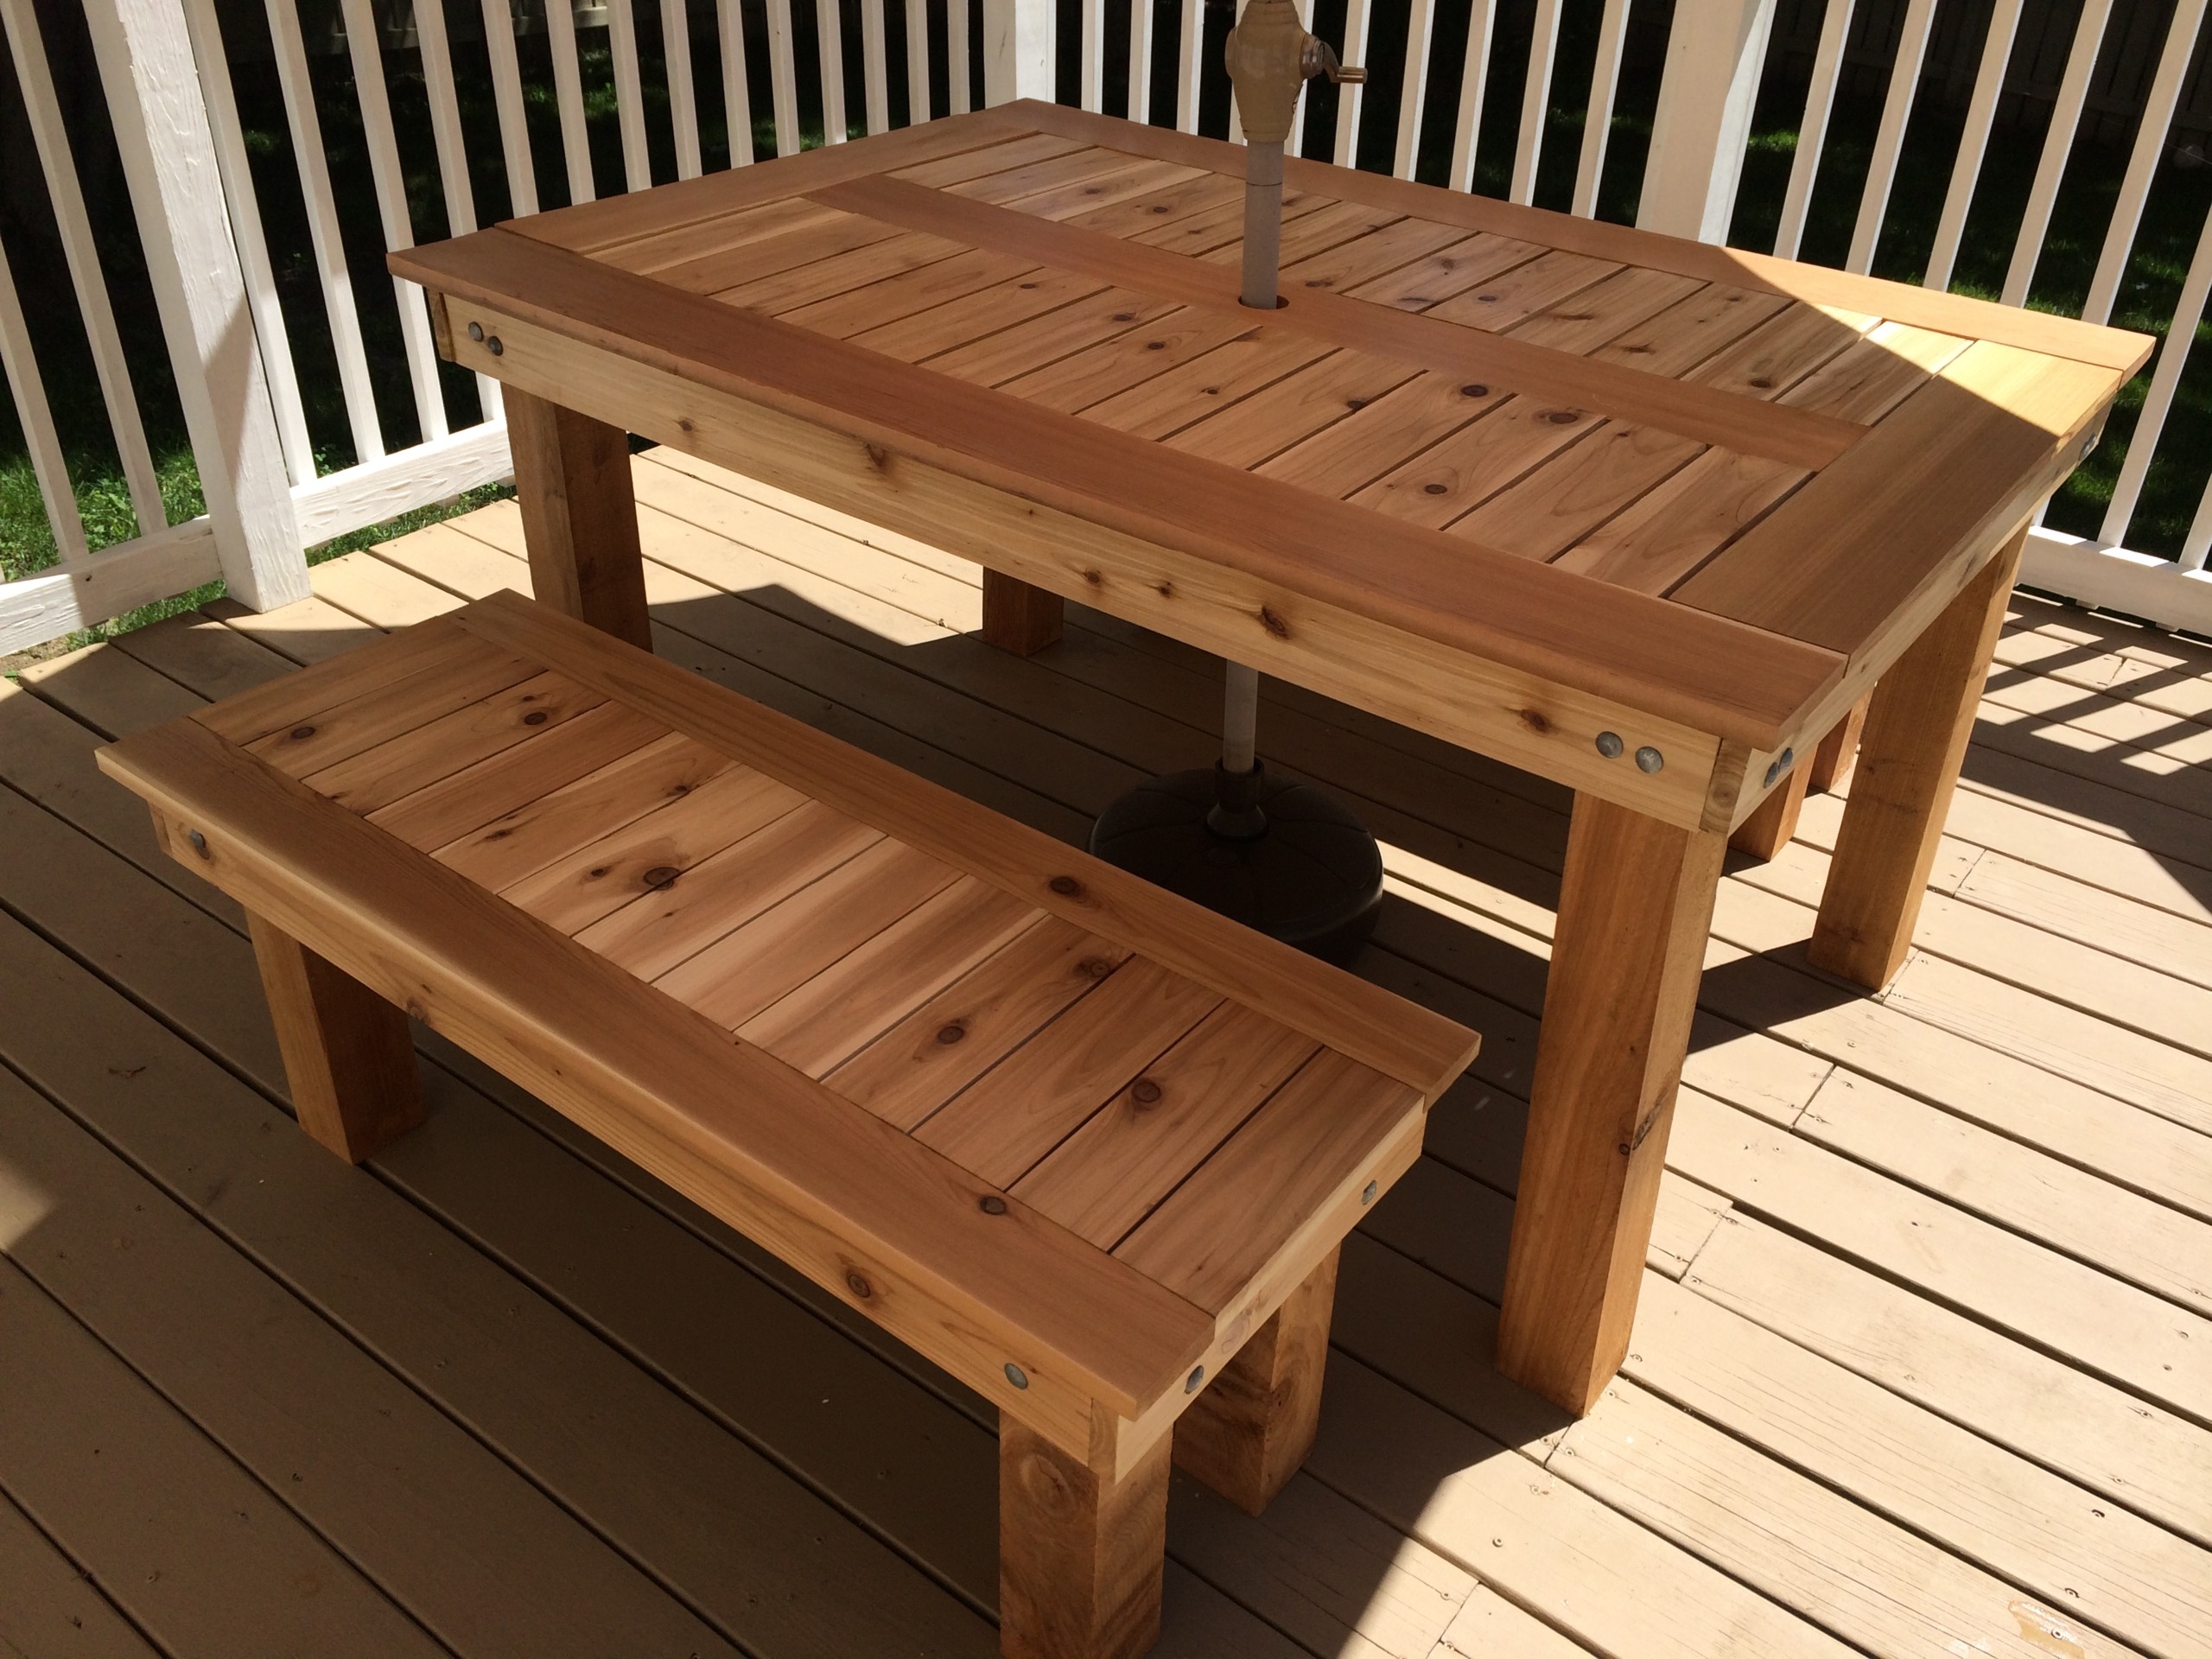 Ana white cedar outdoor dining table and benches diy